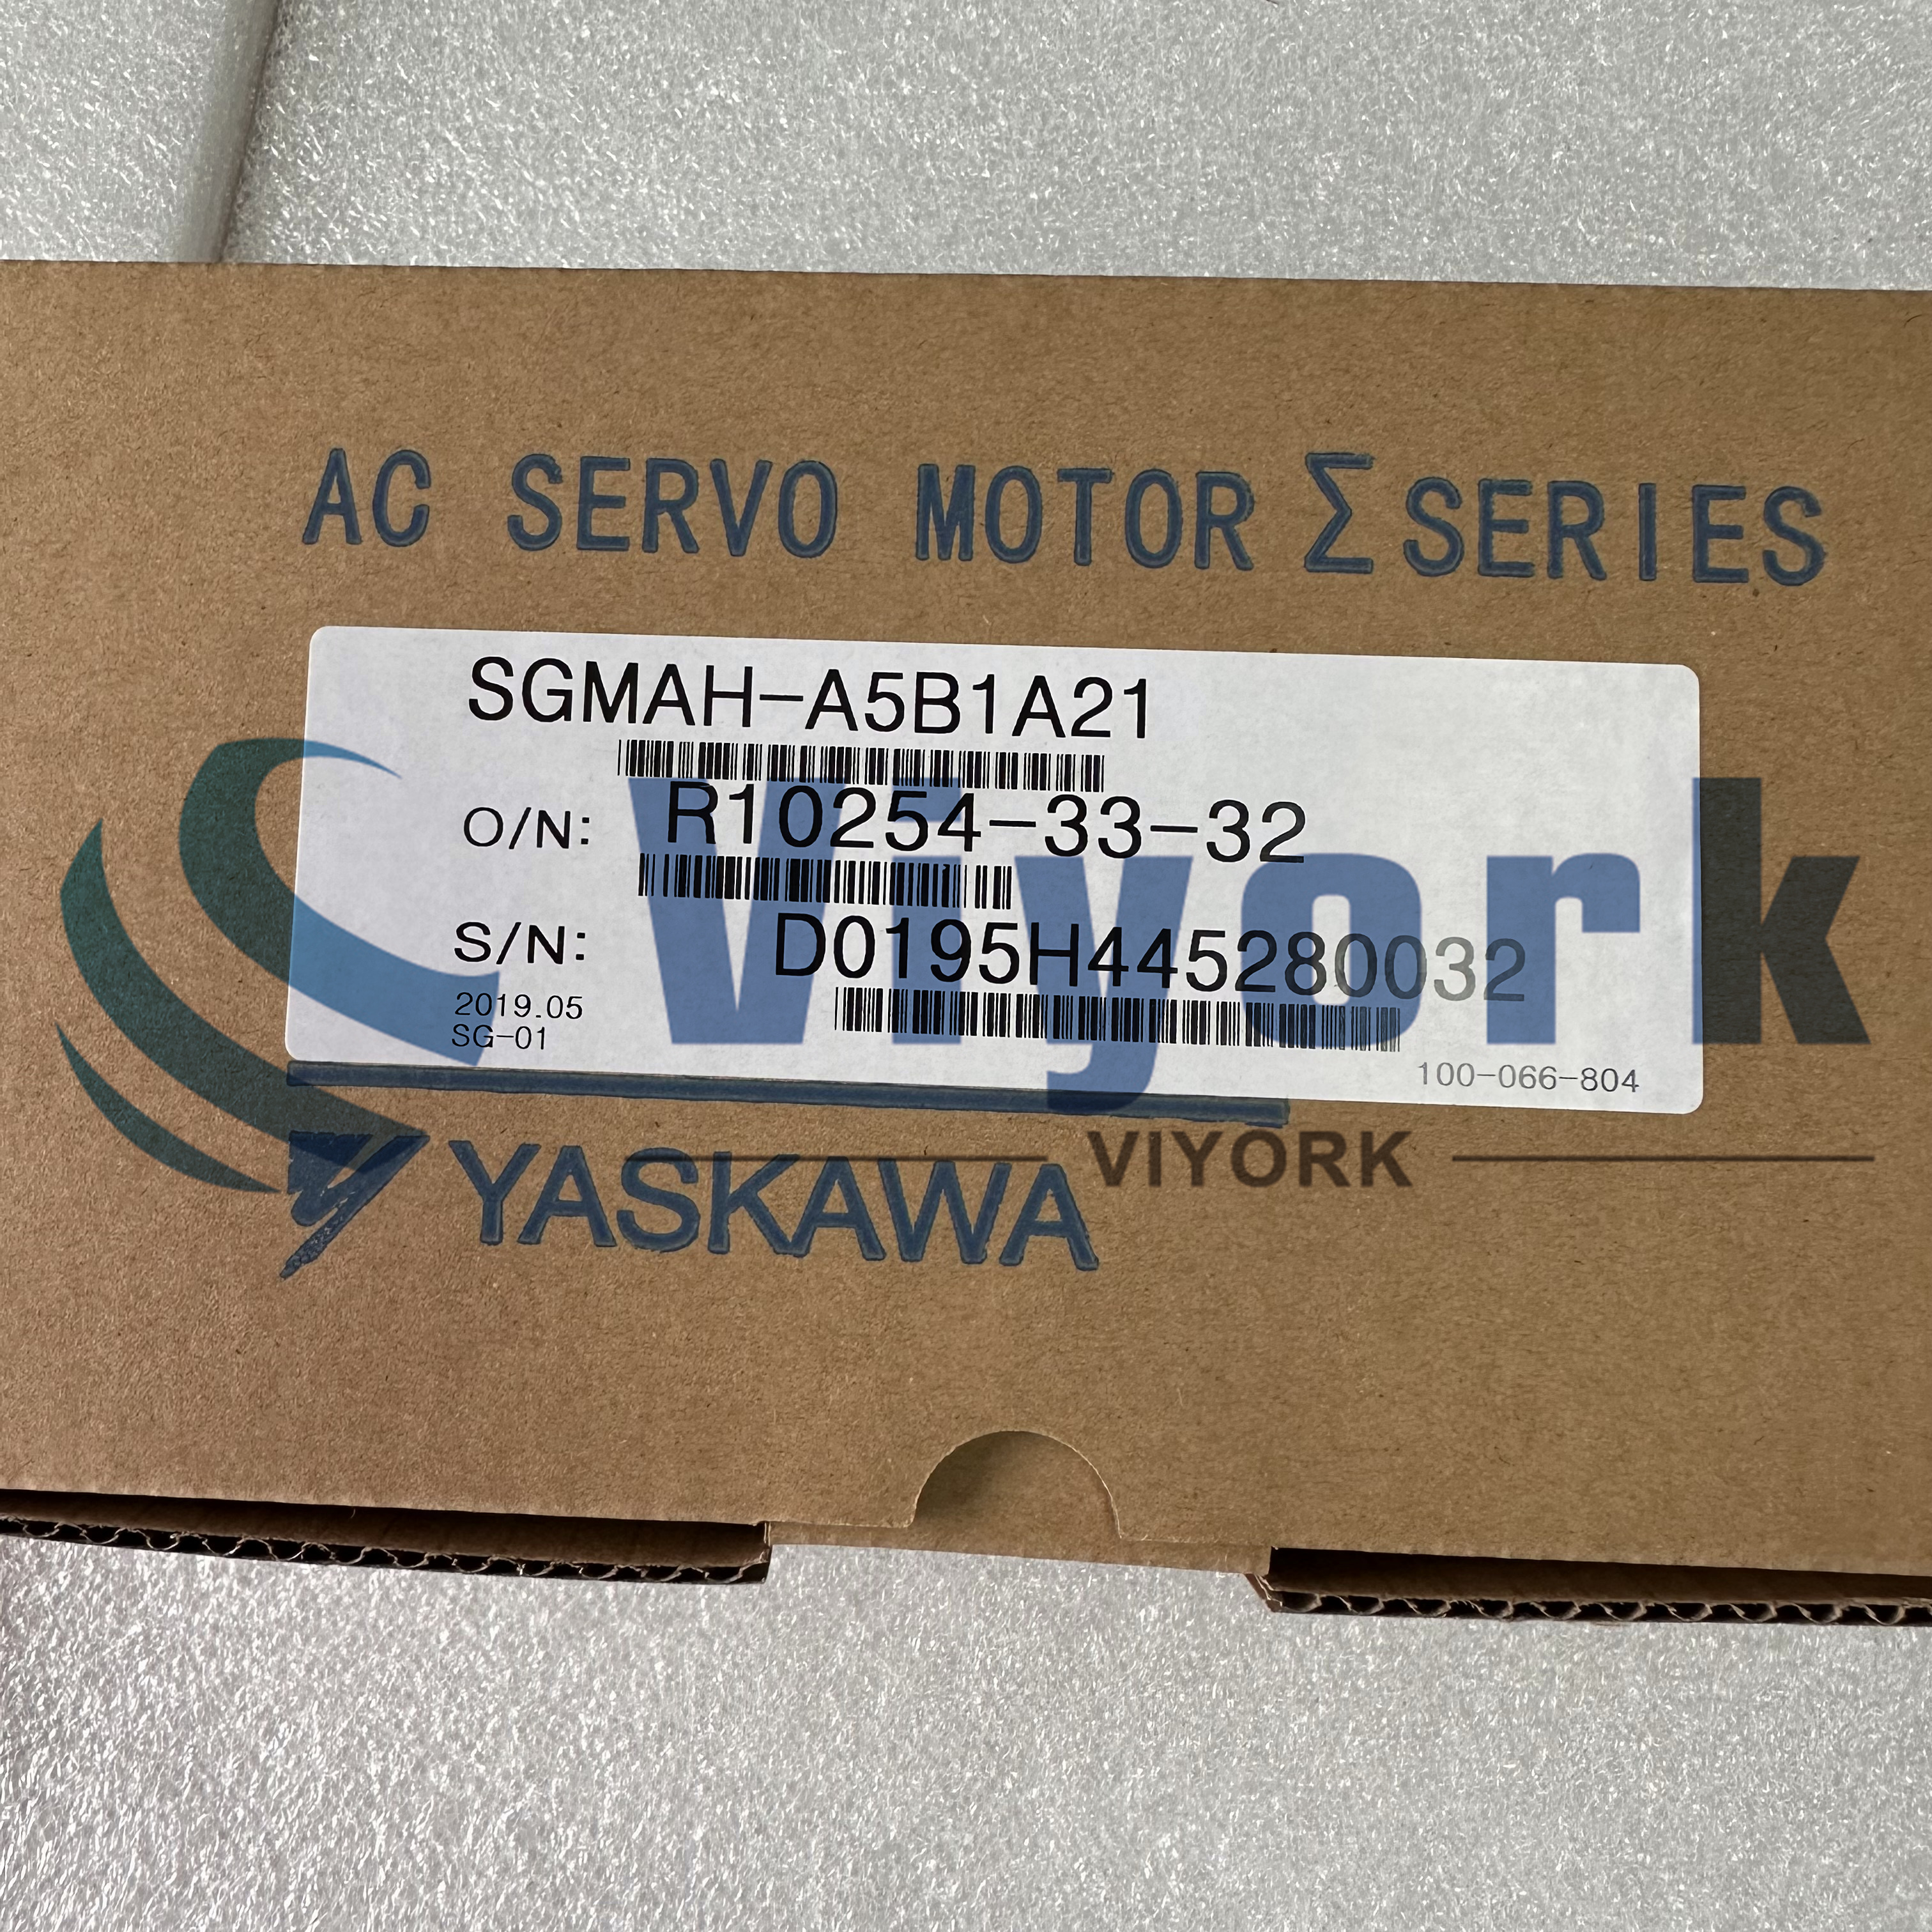 Similar Items Sponsored Feedback on our suggestions | See all   1PC SGMAH-A3AAA21 Servo Motor SGMAHA3AAA21 New In Box Expedited Shipping #A6-32 New RMB 2,644.38 + RMB 137.59 shipping Seller with a ...